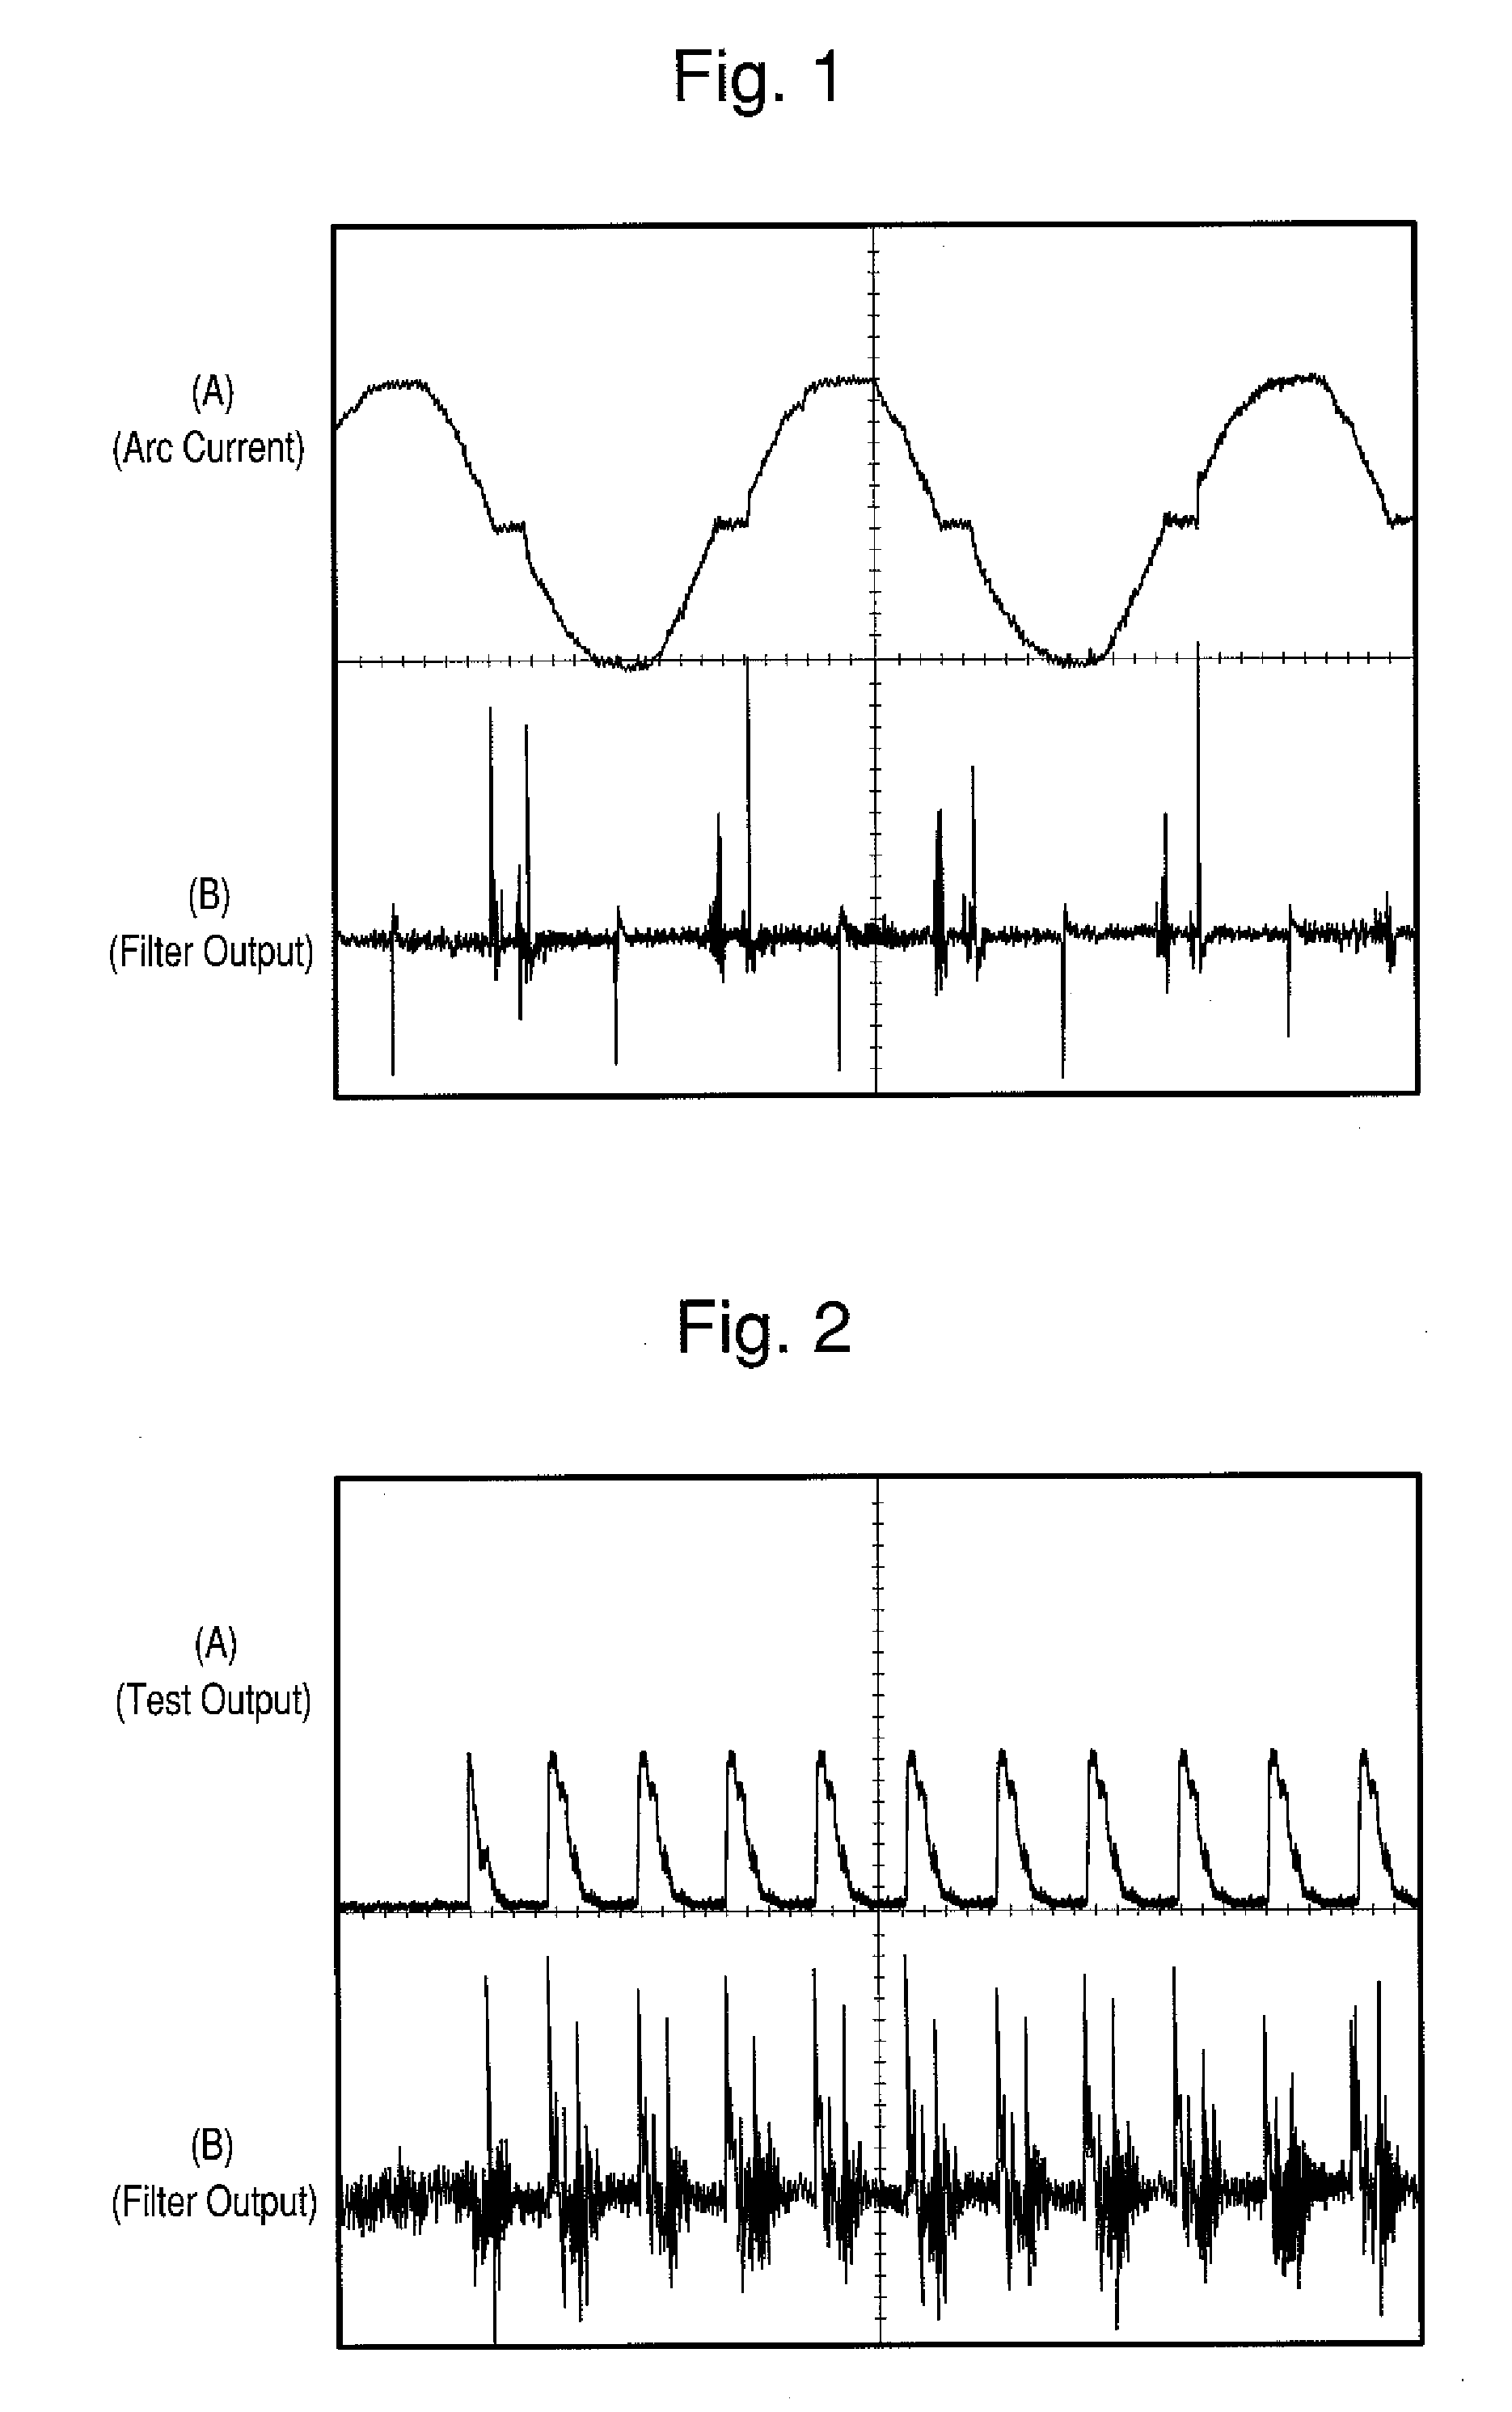 Arc wave generator for testing an arc-fault circuit interrupter